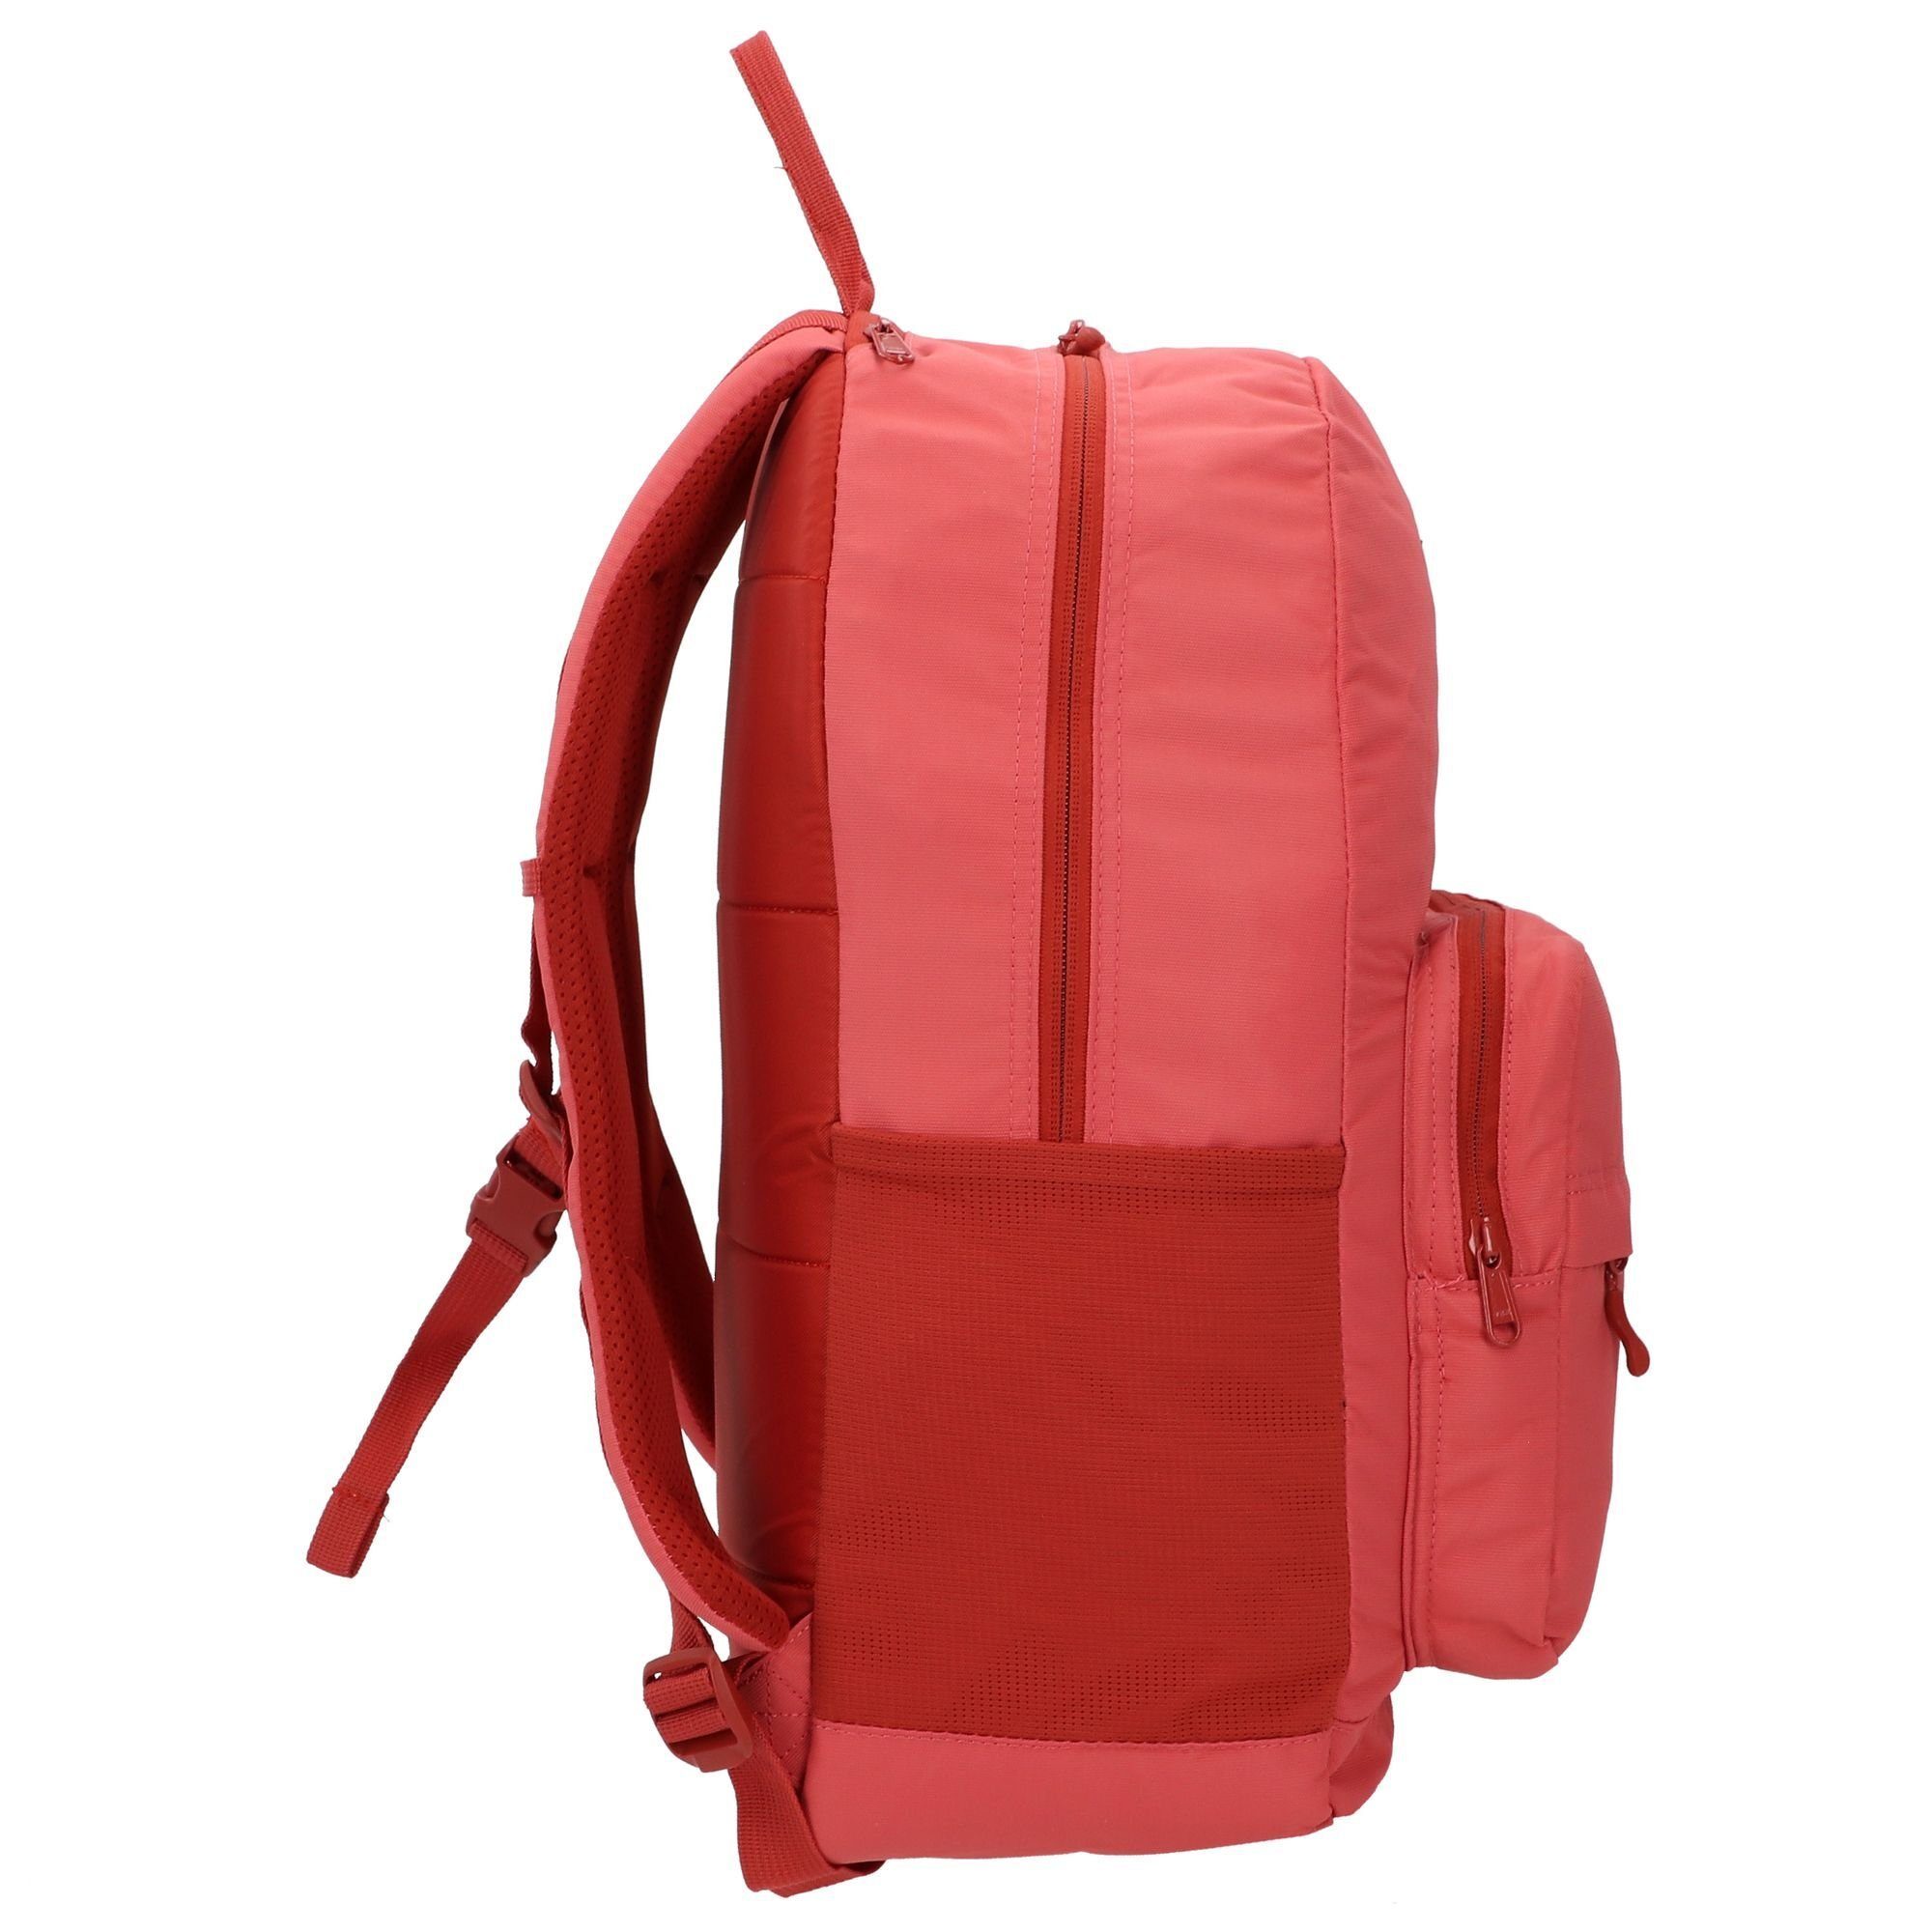 Polyester 365 mineral red PACK, Dakine Daypack